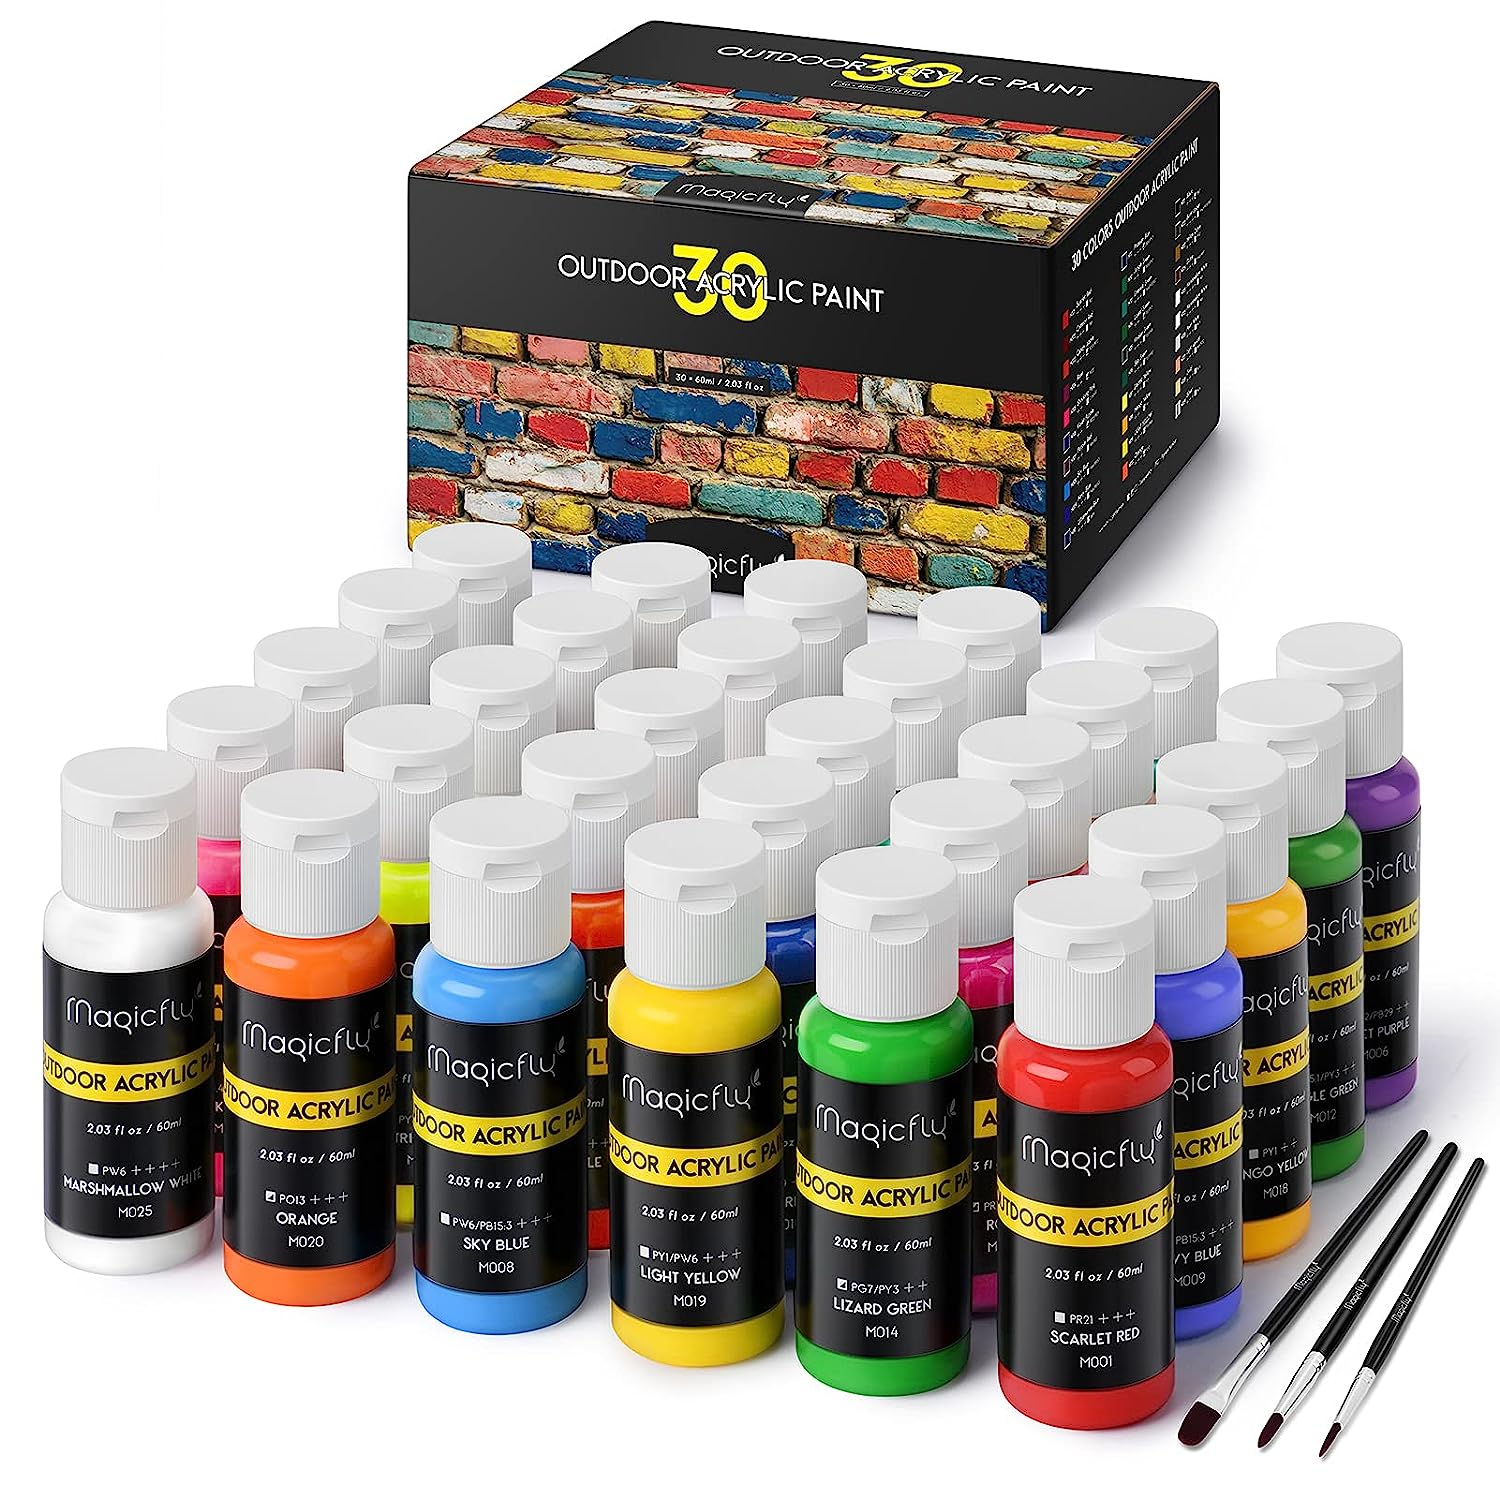 Magicfly Outdoor Acrylic Paint, Set of 30 Colors [...]